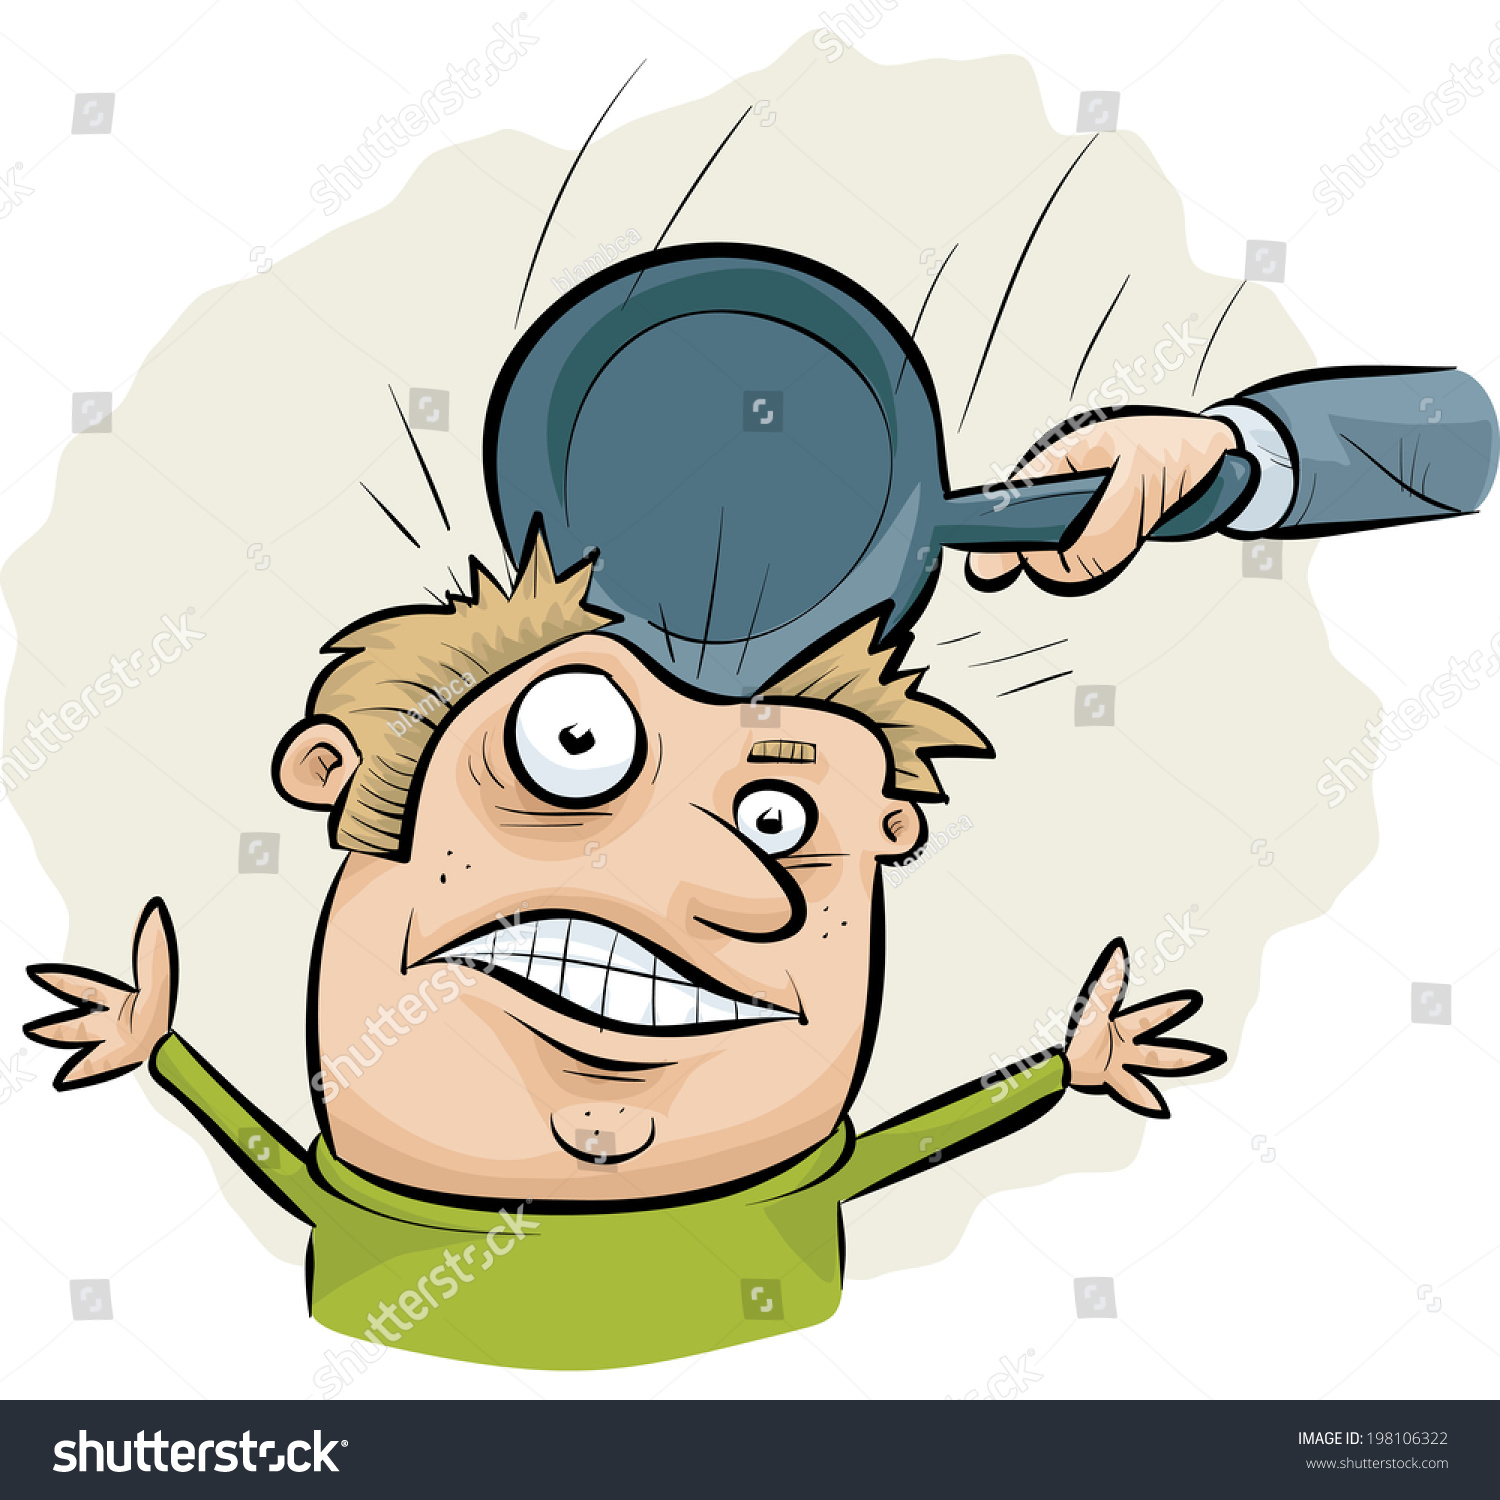 stock-vector-a-cartoon-man-gets-smashed-in-the-head-by-a-frying-pan-198106322.jpg